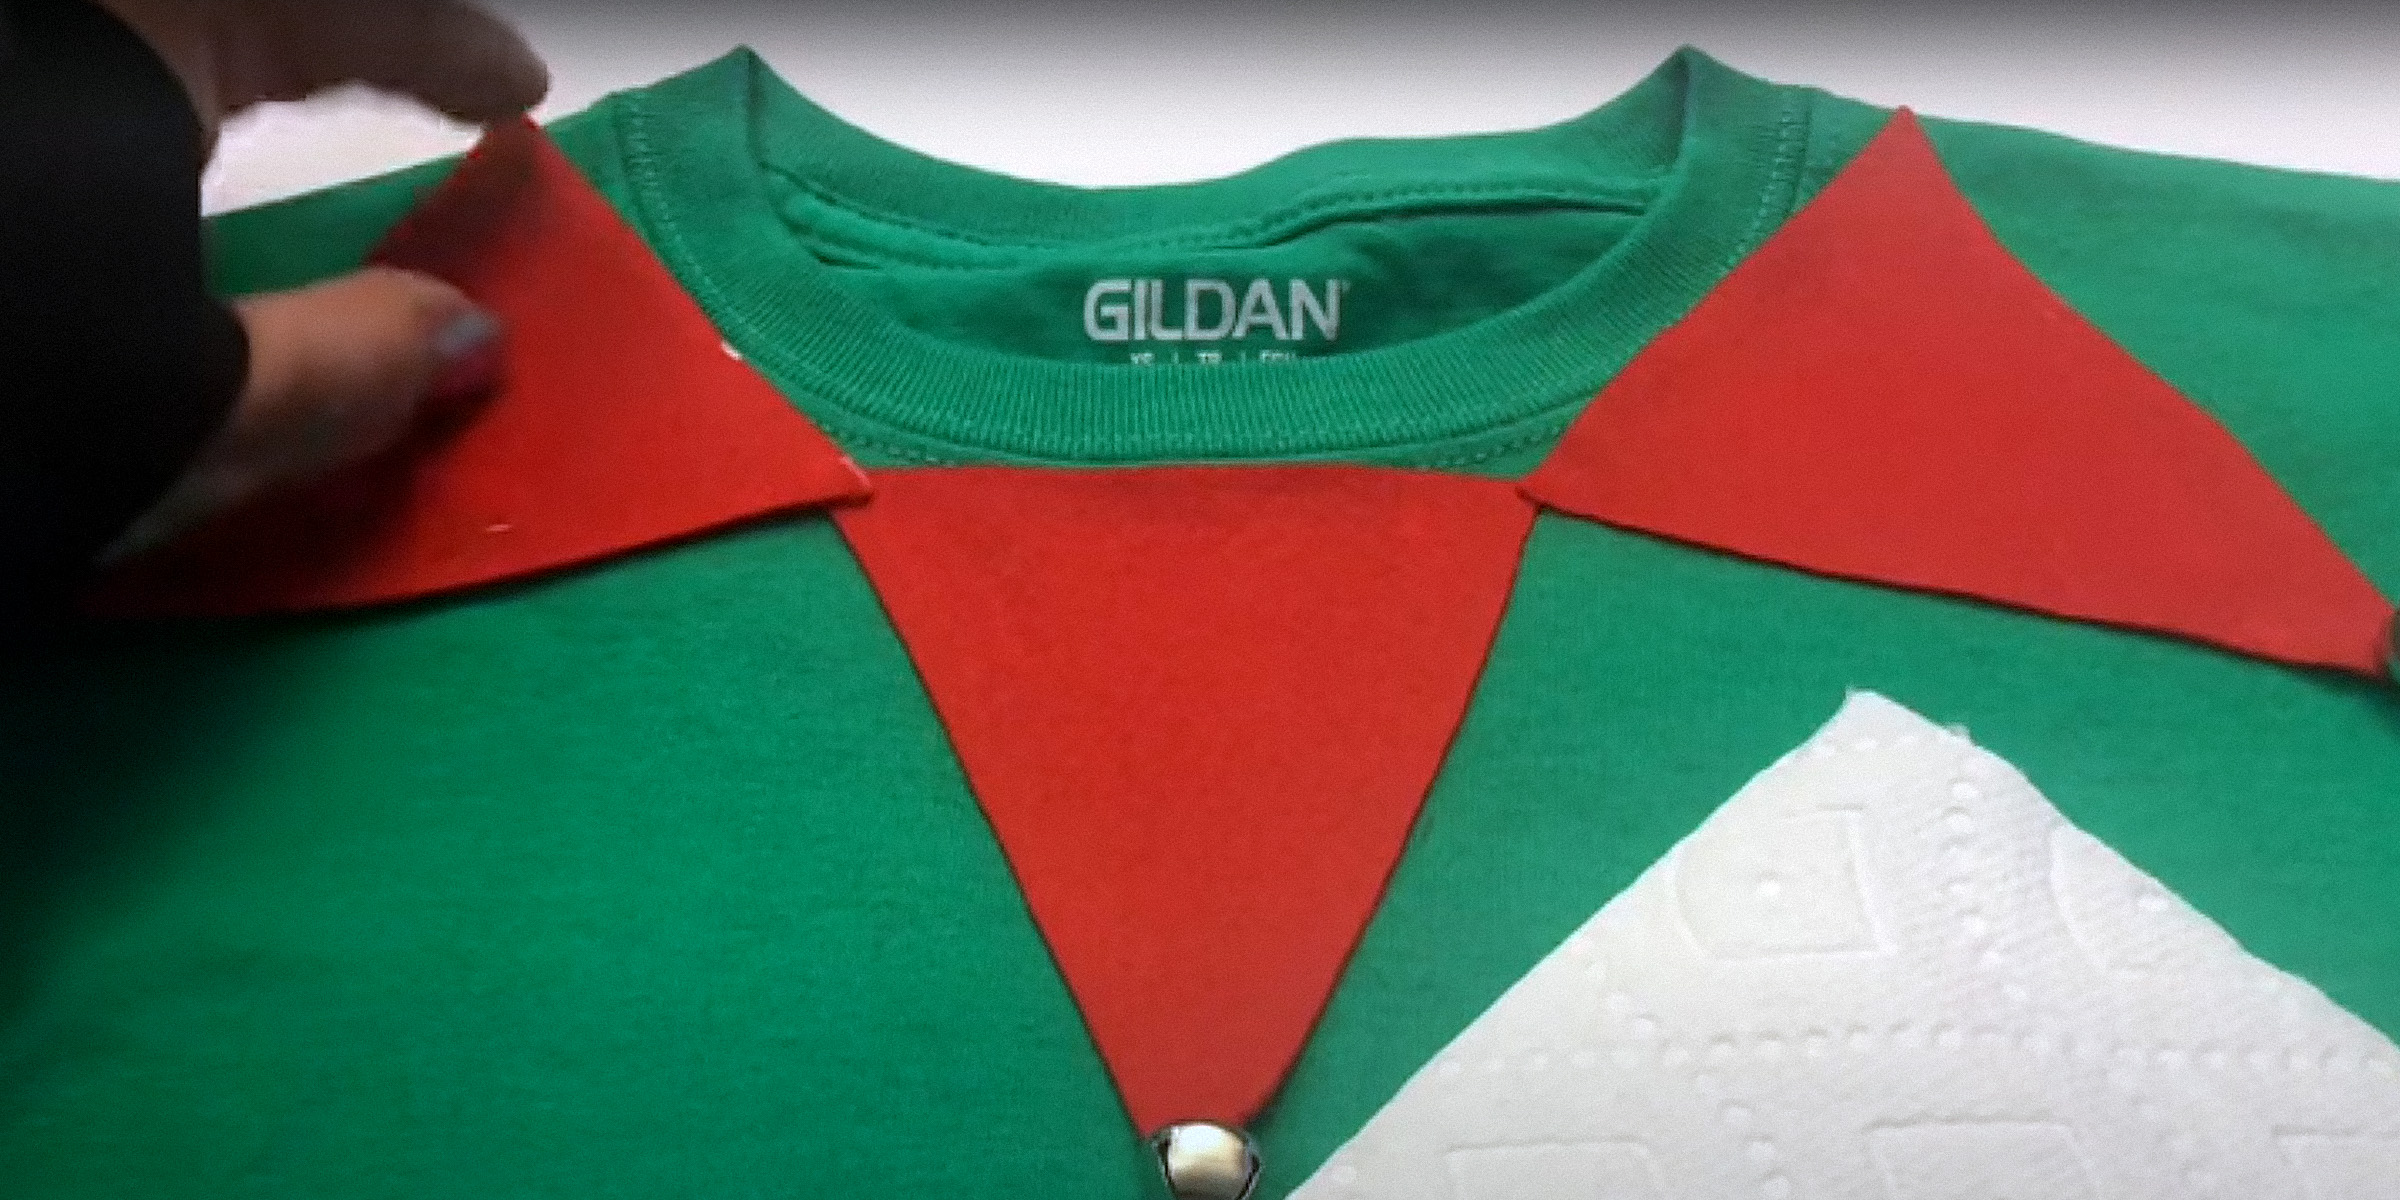 DIY elf costume | Source: YouTube/craftingwithgaby